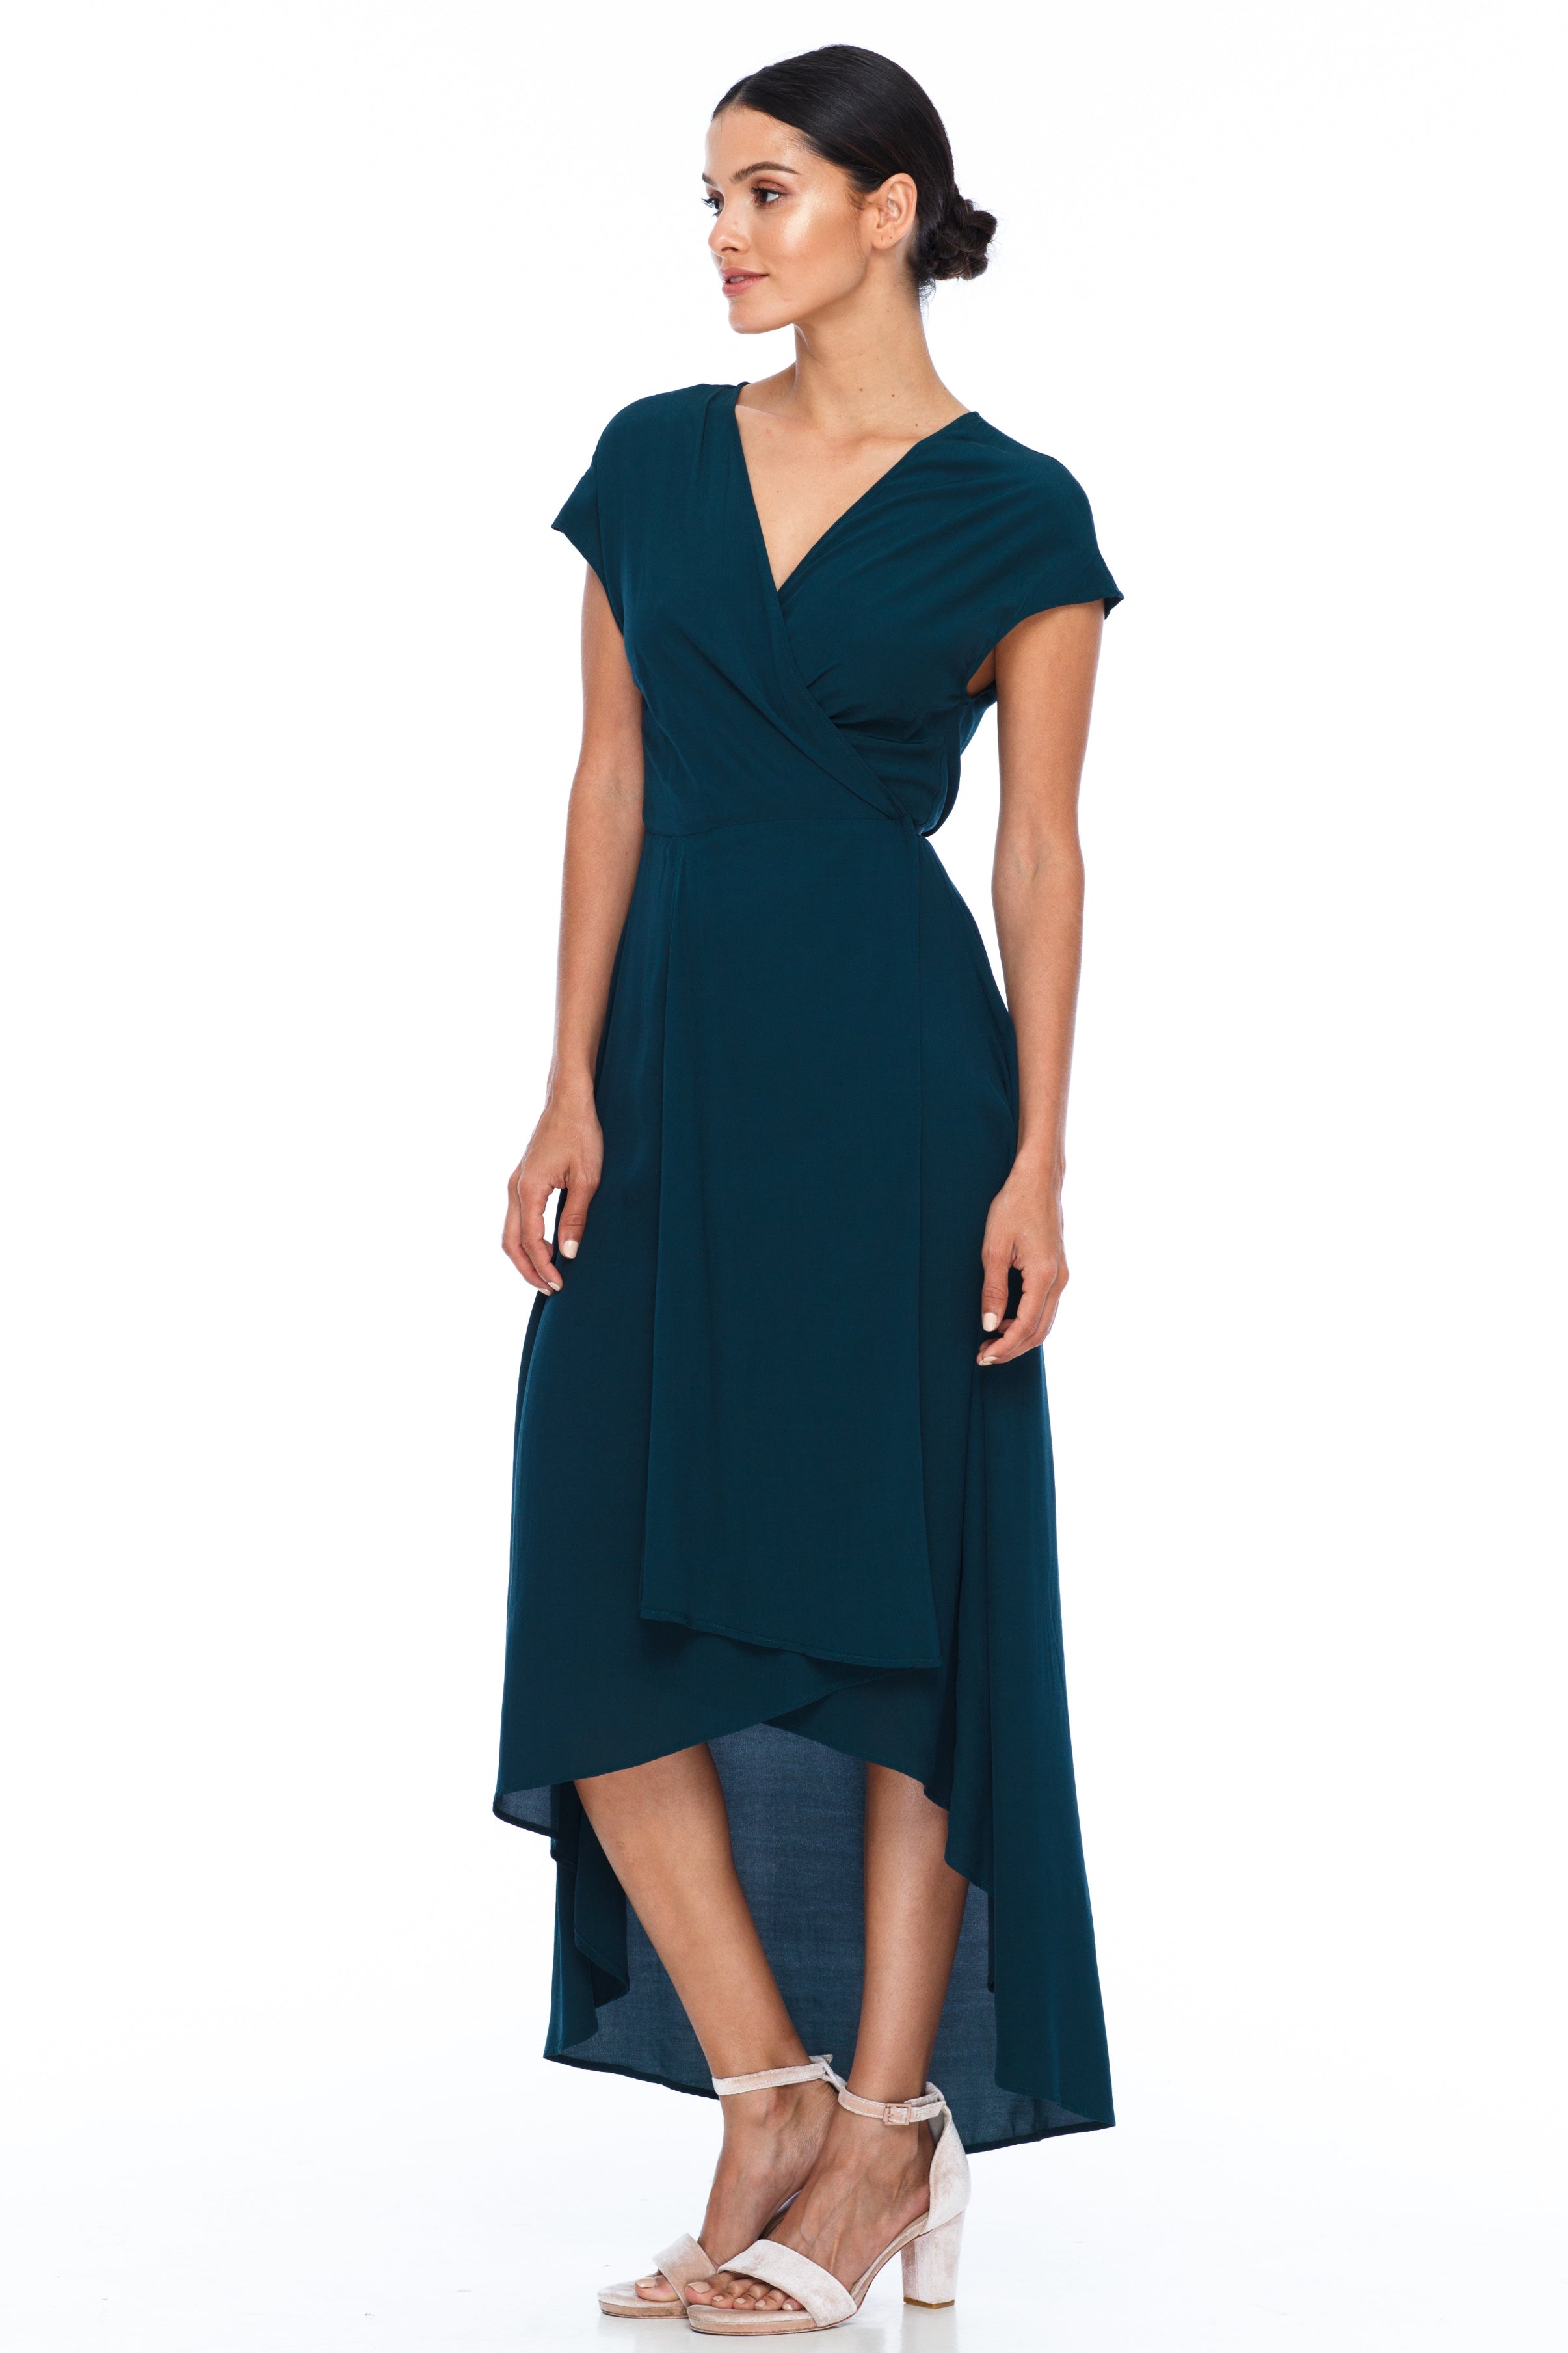 A BLAK bridesmaid dress - Beautifully crafted with a free flowing style, an asymmetrical hemline, cut in a circular shape creating length at the back; The Eternal Dress is a flattering and chic cut. 